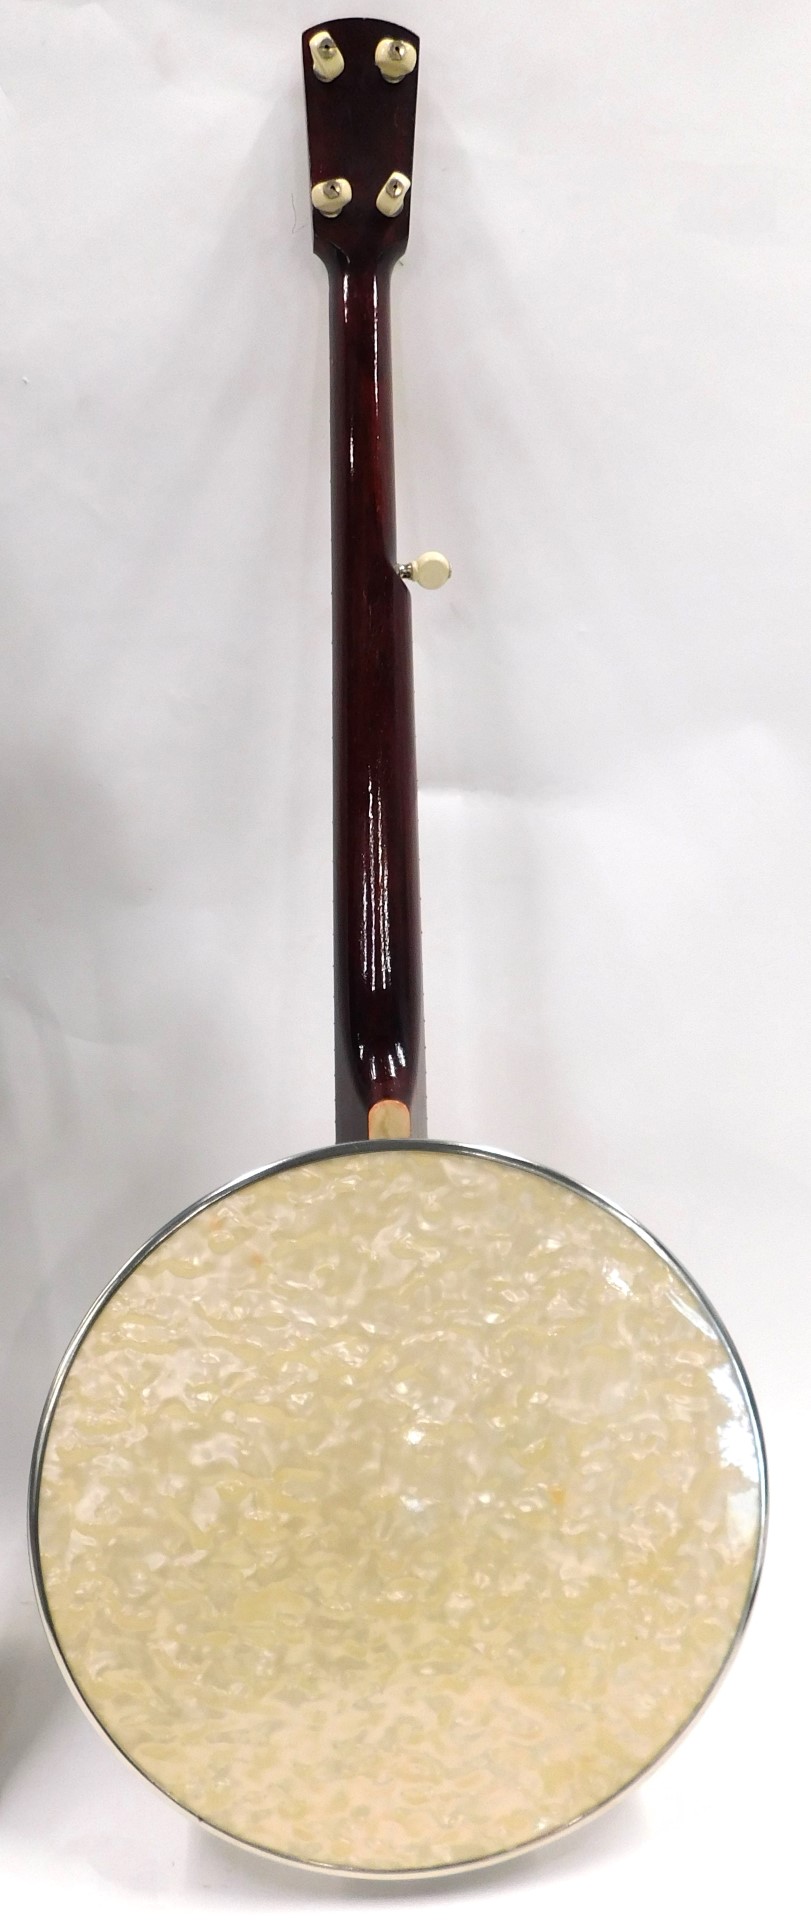 A B&S Master of London Ivory Queen banjo, with a simulated mother of pearl finger board, sides and b - Image 5 of 6